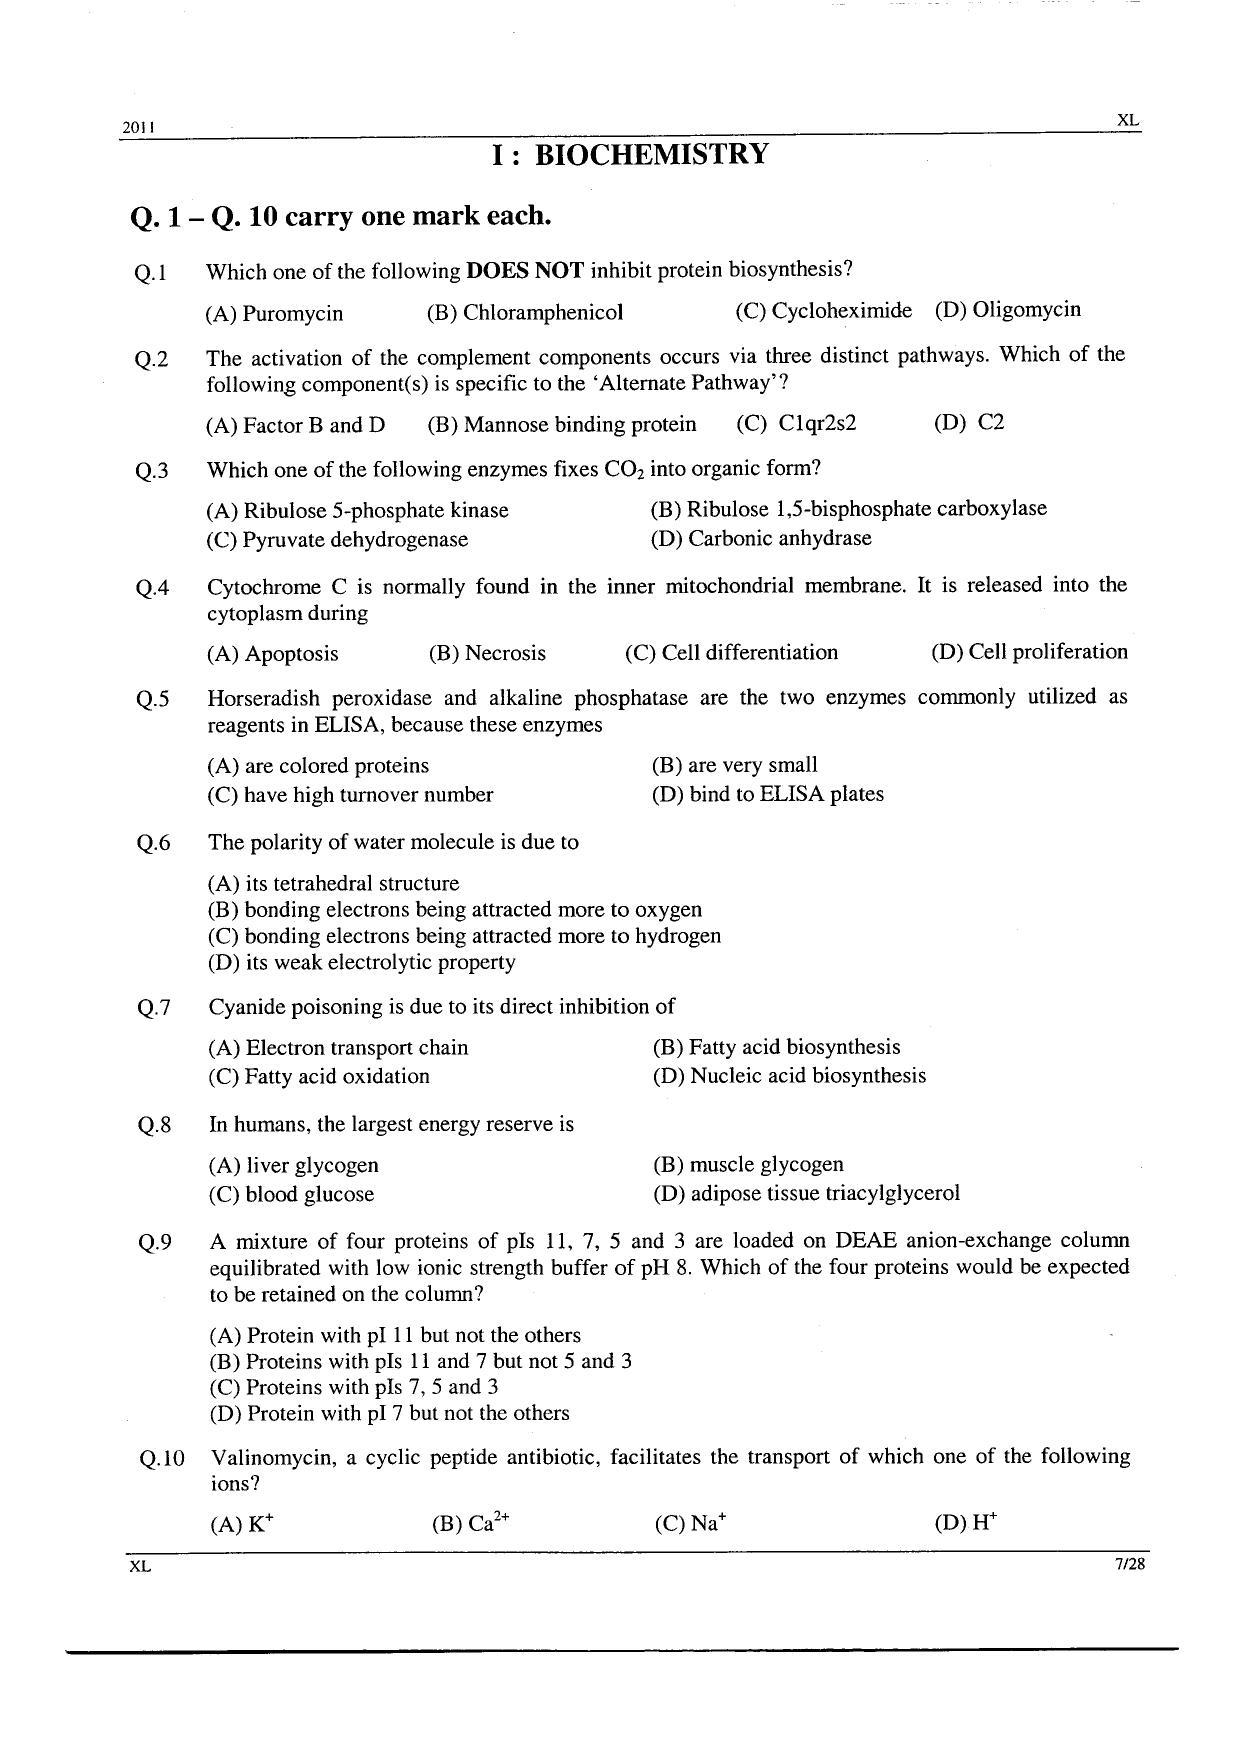 GATE 2011 Life Sciences (XL) Question Paper with Answer Key - Page 7